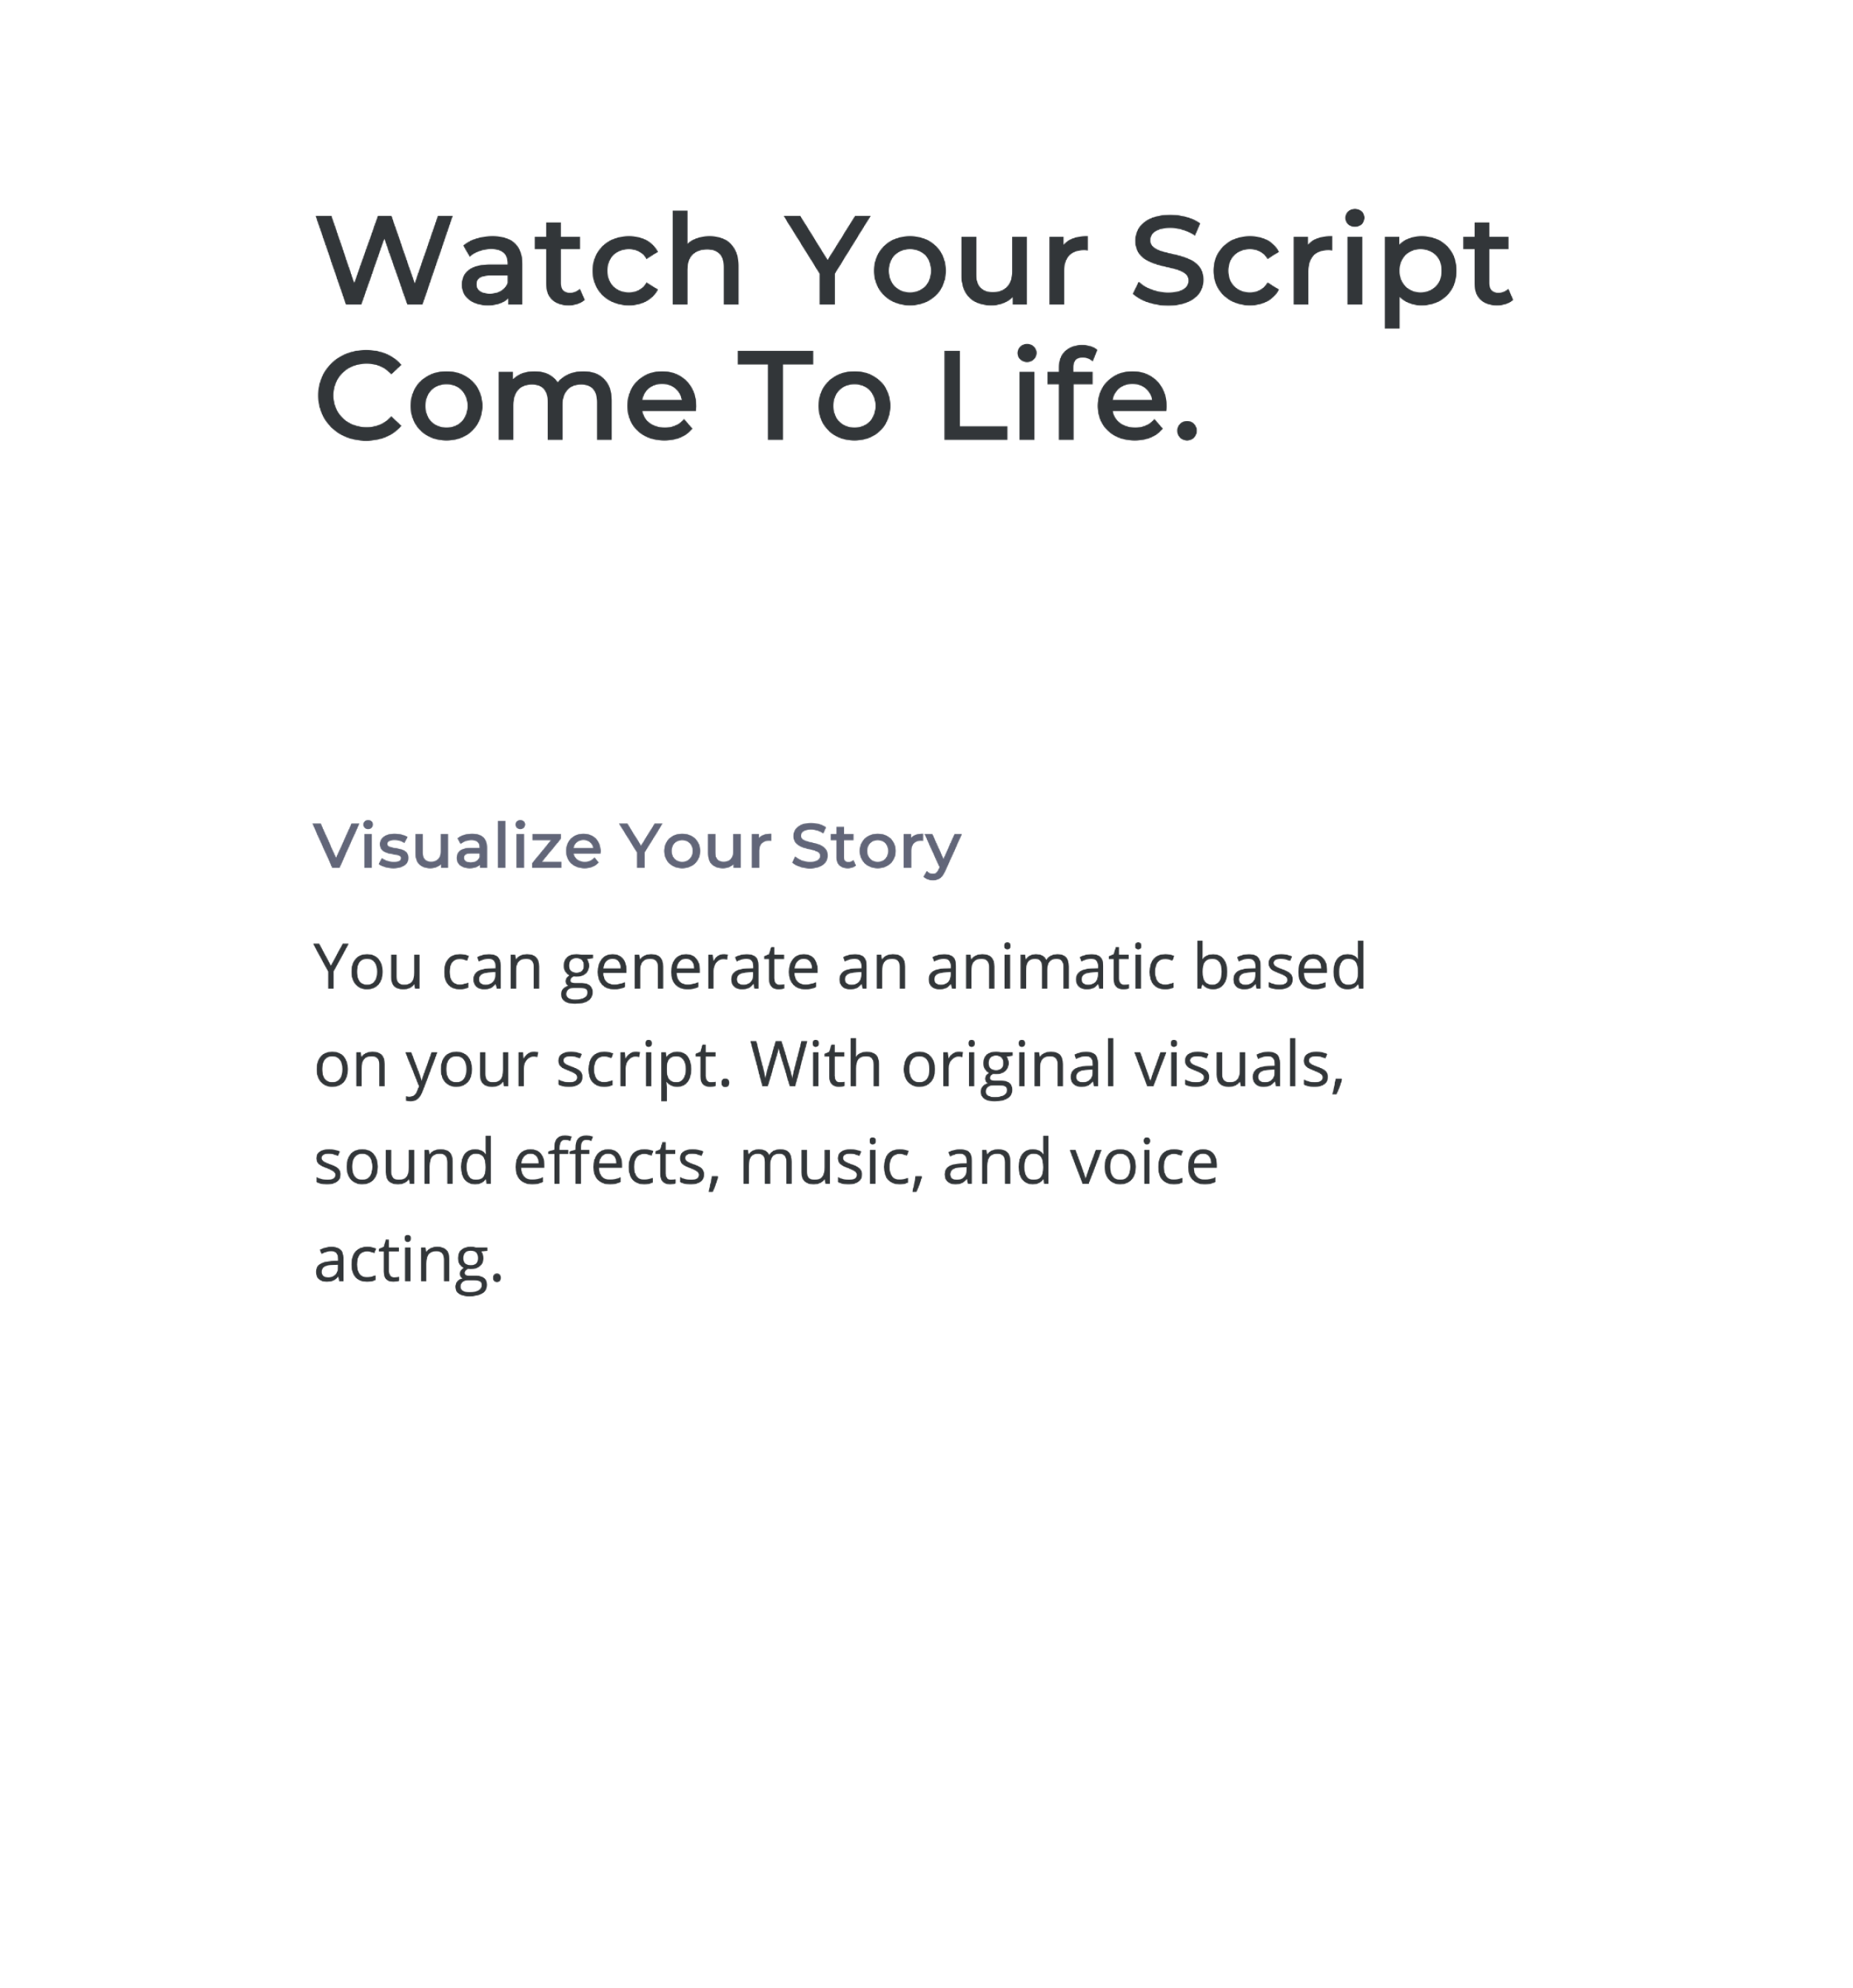 Watch Your Script Come To Life.


Visualize Your Story
You can generate a video based on your script. With original visuals, sound effects, music, and voice acting.
